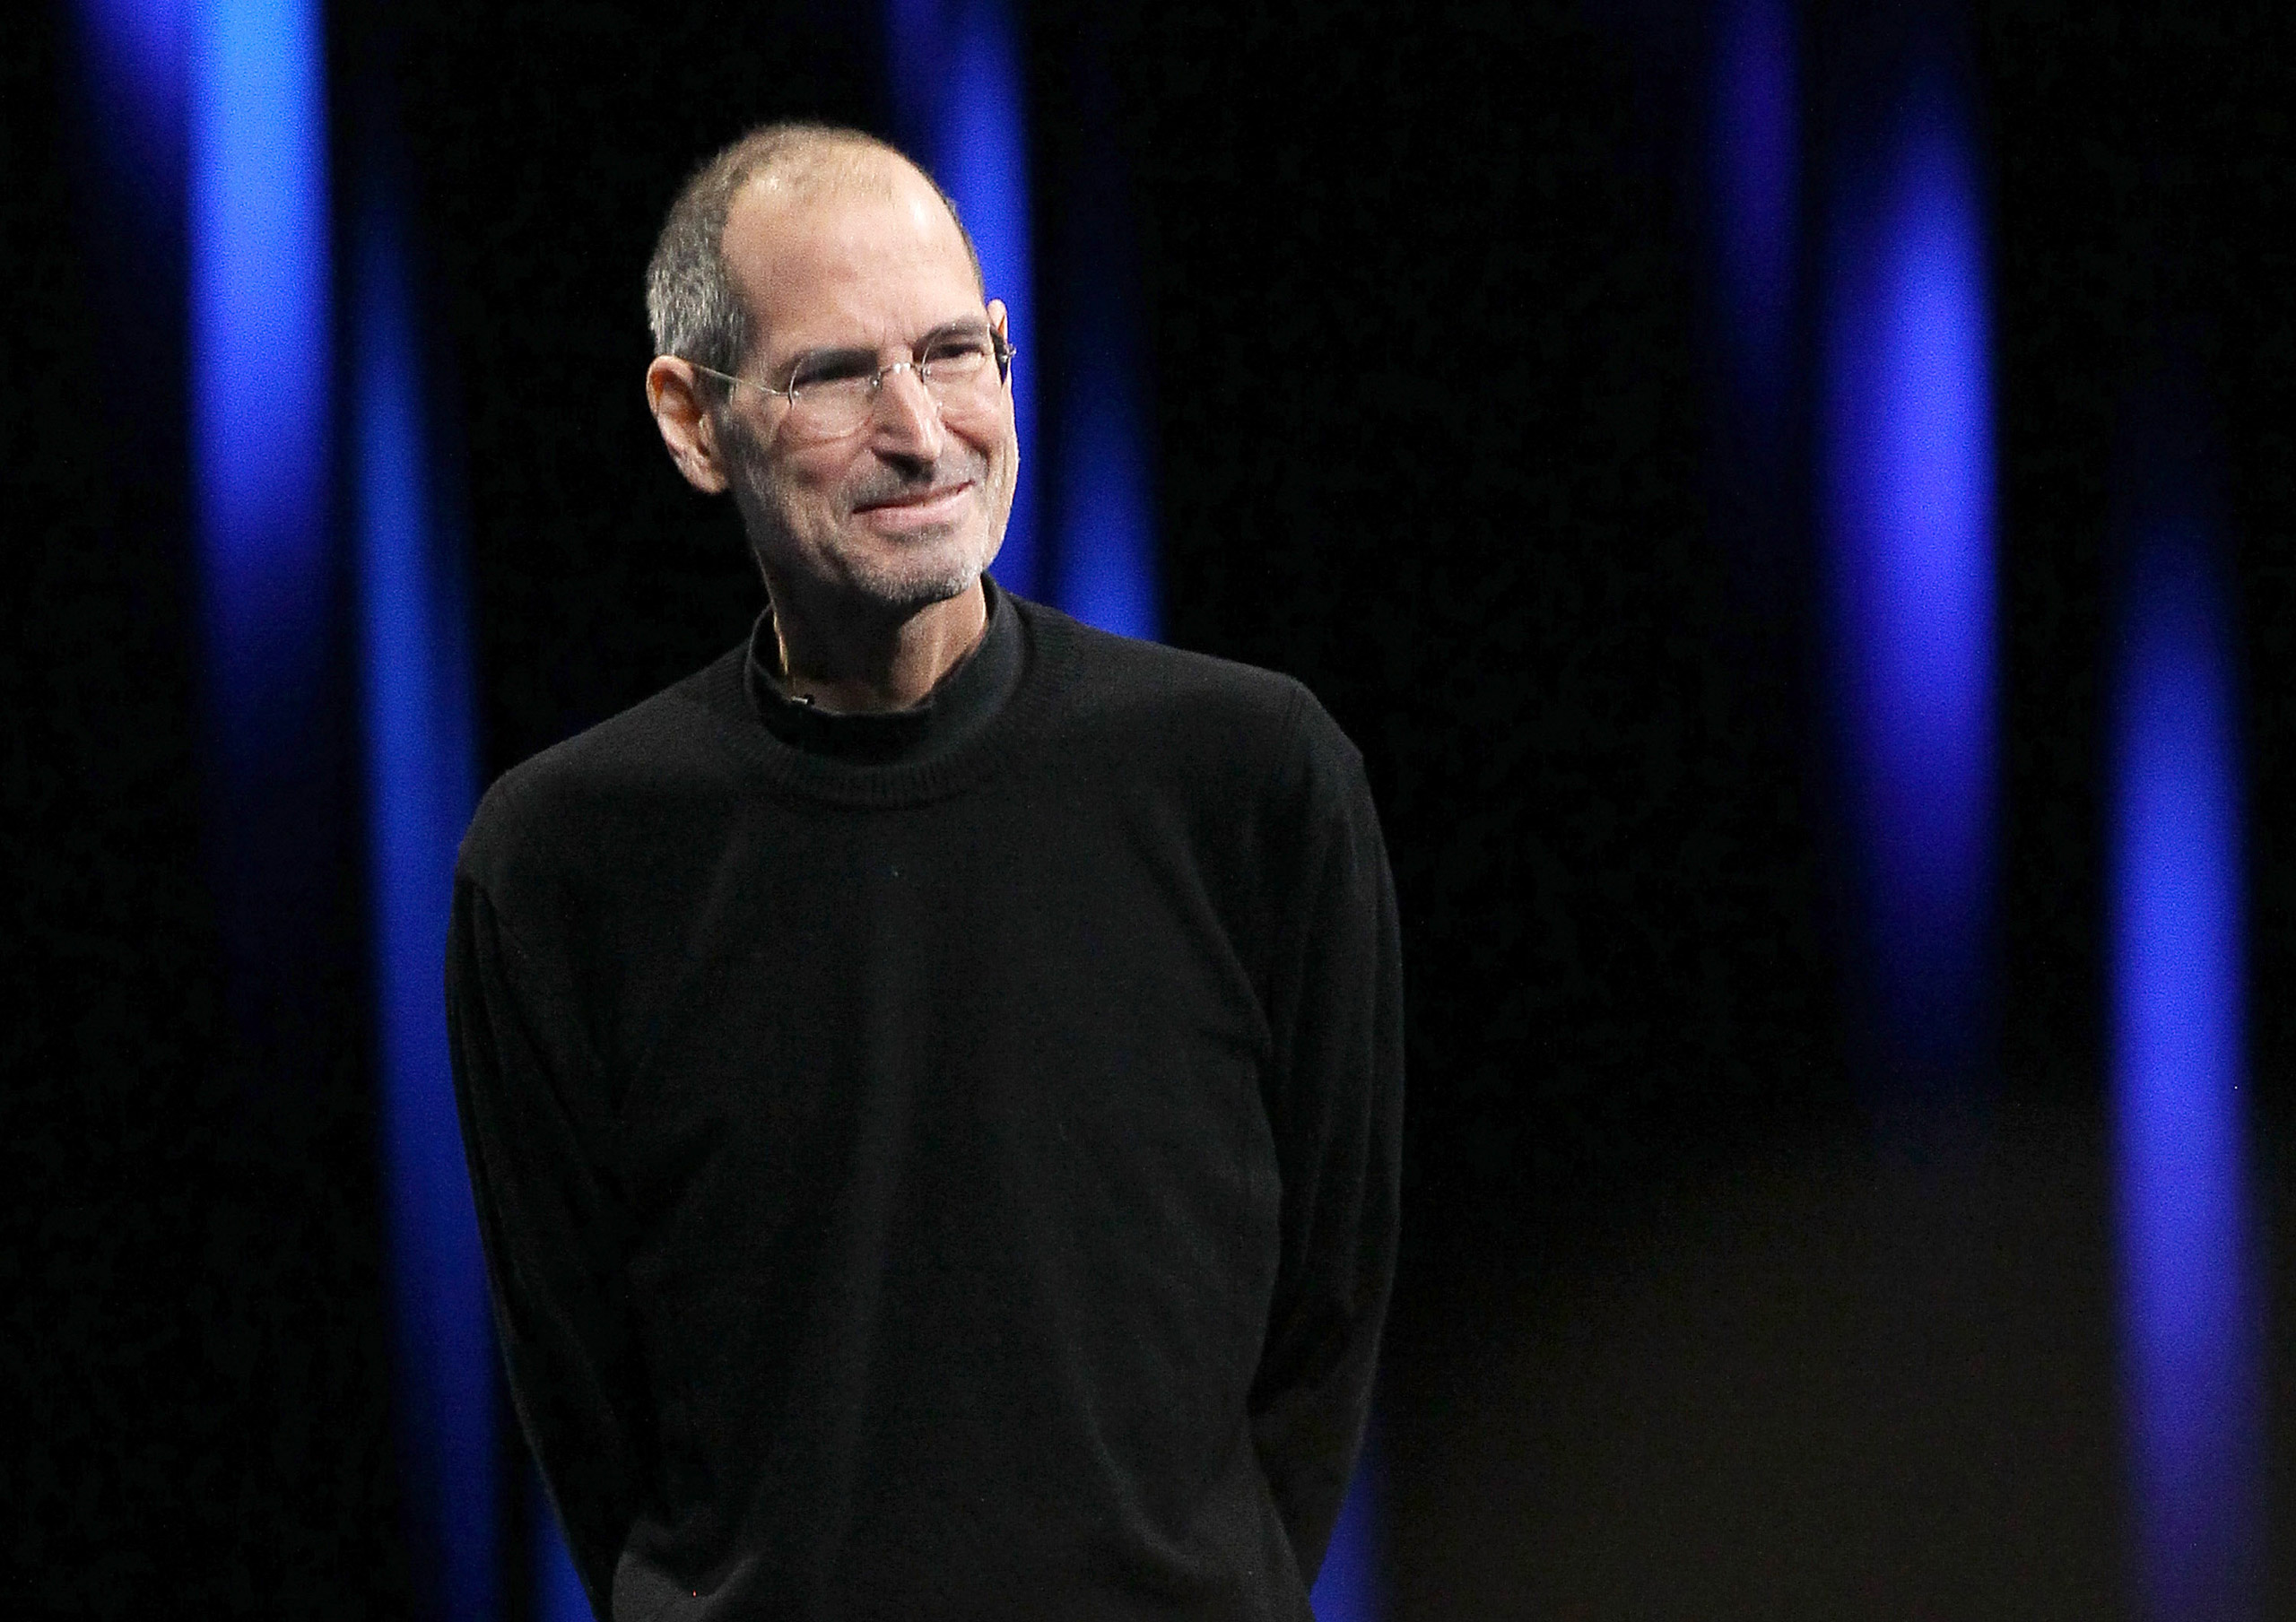 Apple CEO Steve Jobs at the 2011 Apple World Wide Developers Conference at the Moscone Center on June 6, 2011 in San Francisco. (Justin Sullivan—Getty Images)